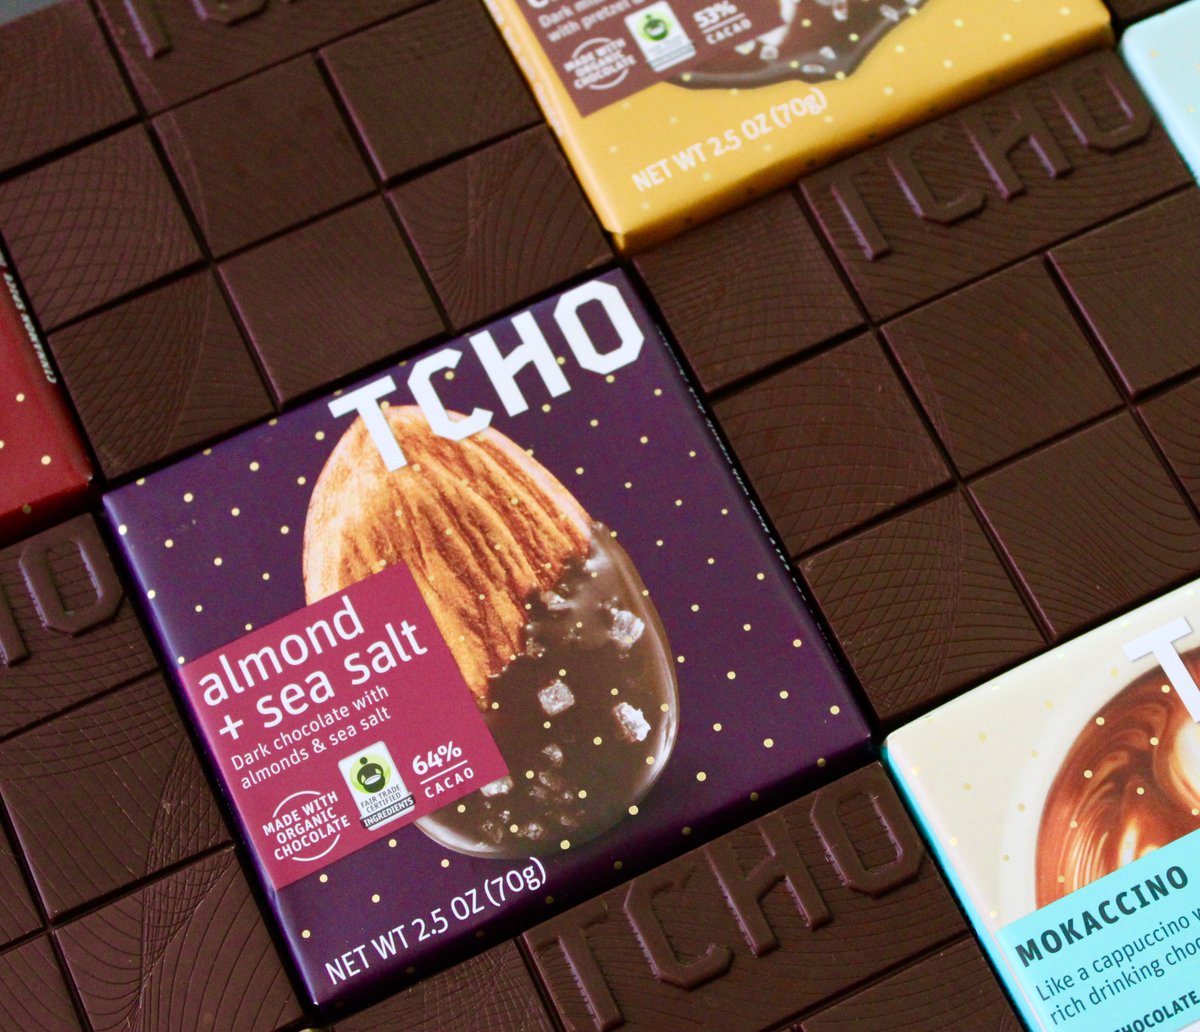 Kosher Certification for the TCHO Chocolate Brand